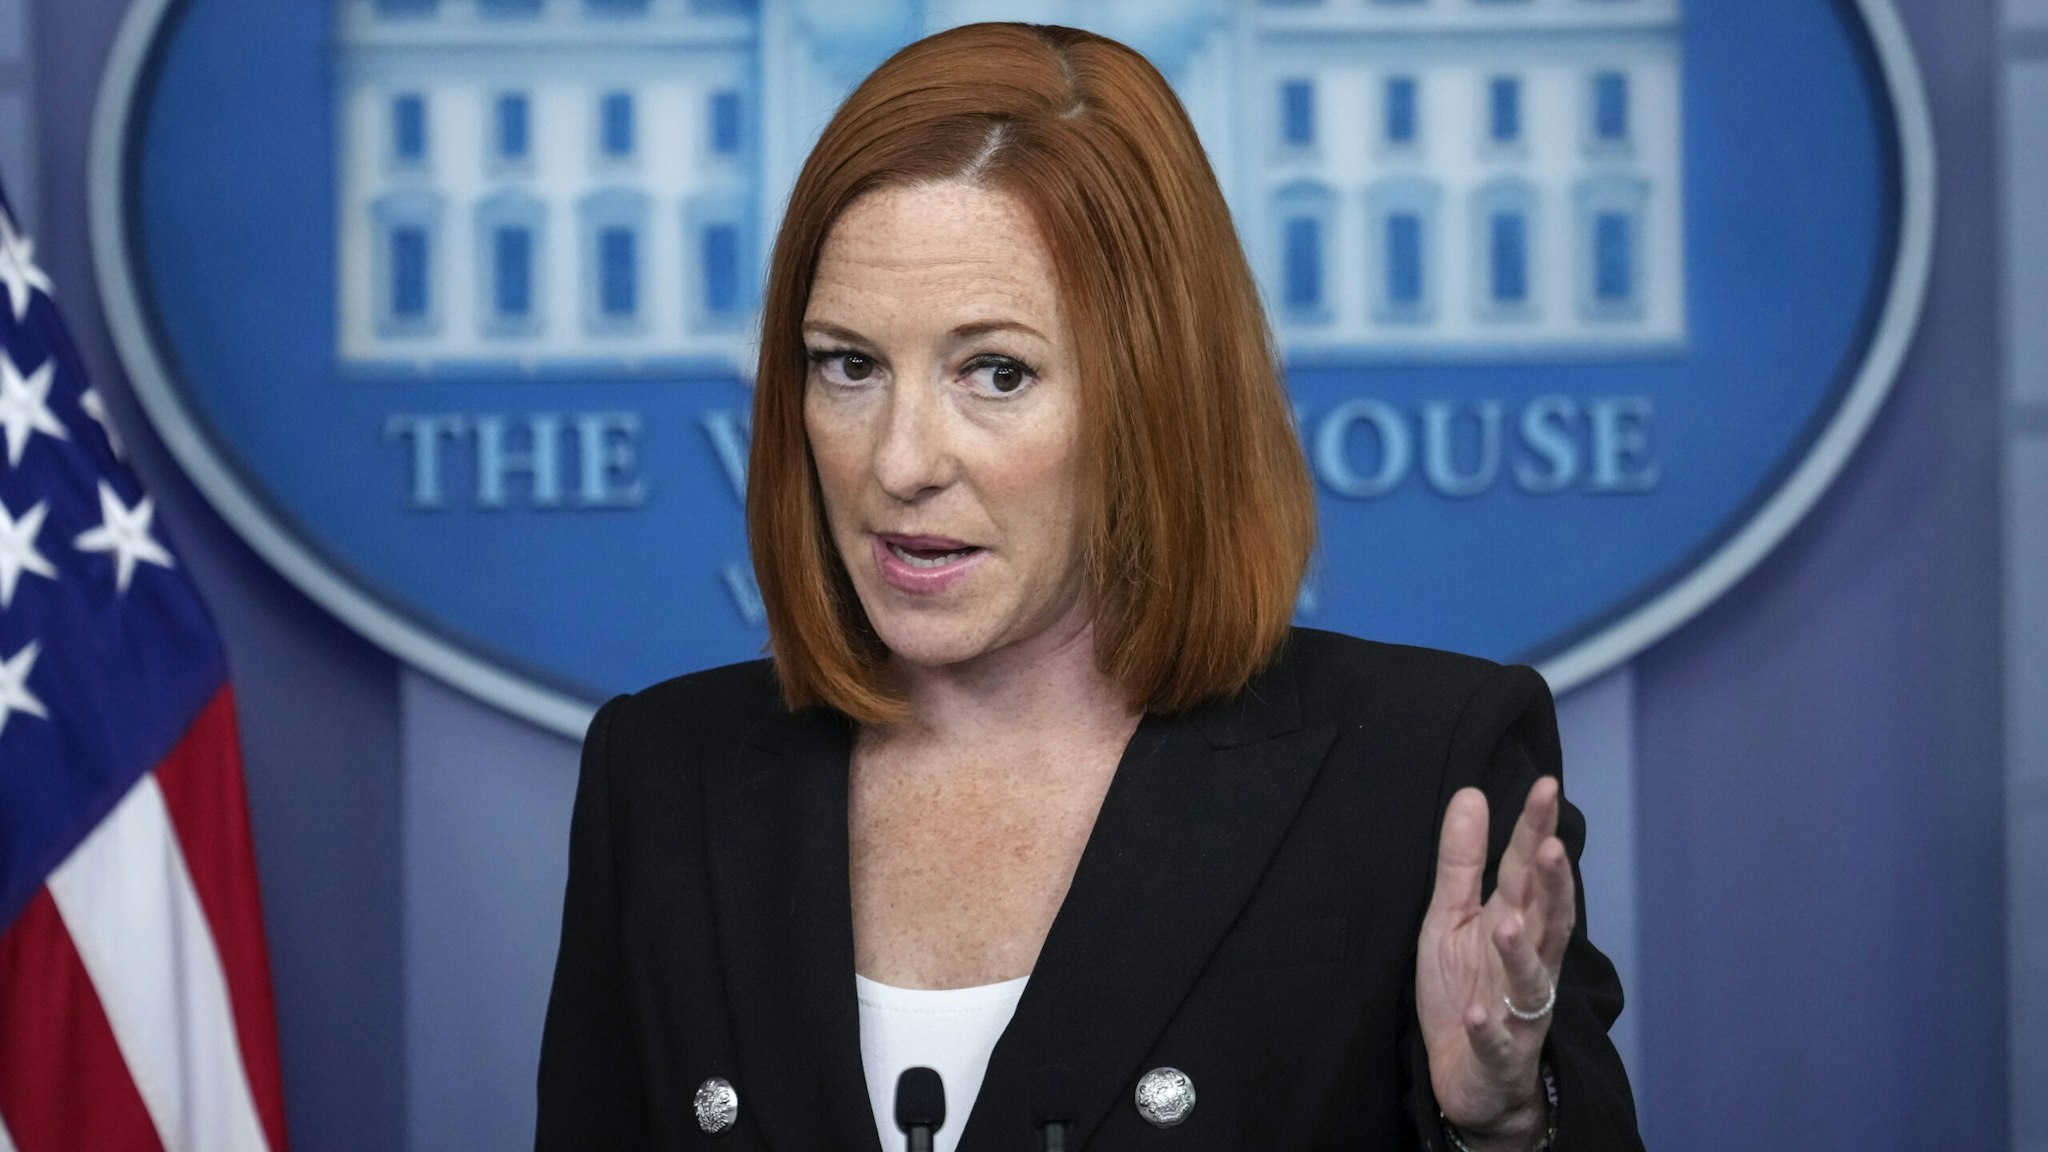 WASHINGTON, DC - JULY 20: White House Press Secretary Jen Psaki speaks during the daily press briefing at the White House on July 20, 2021 in Washington, DC. Psaki acknowledged that a White House staffer has tested positive for COVID-19 and there have been other recent breakthrough cases of vaccinated staff members.